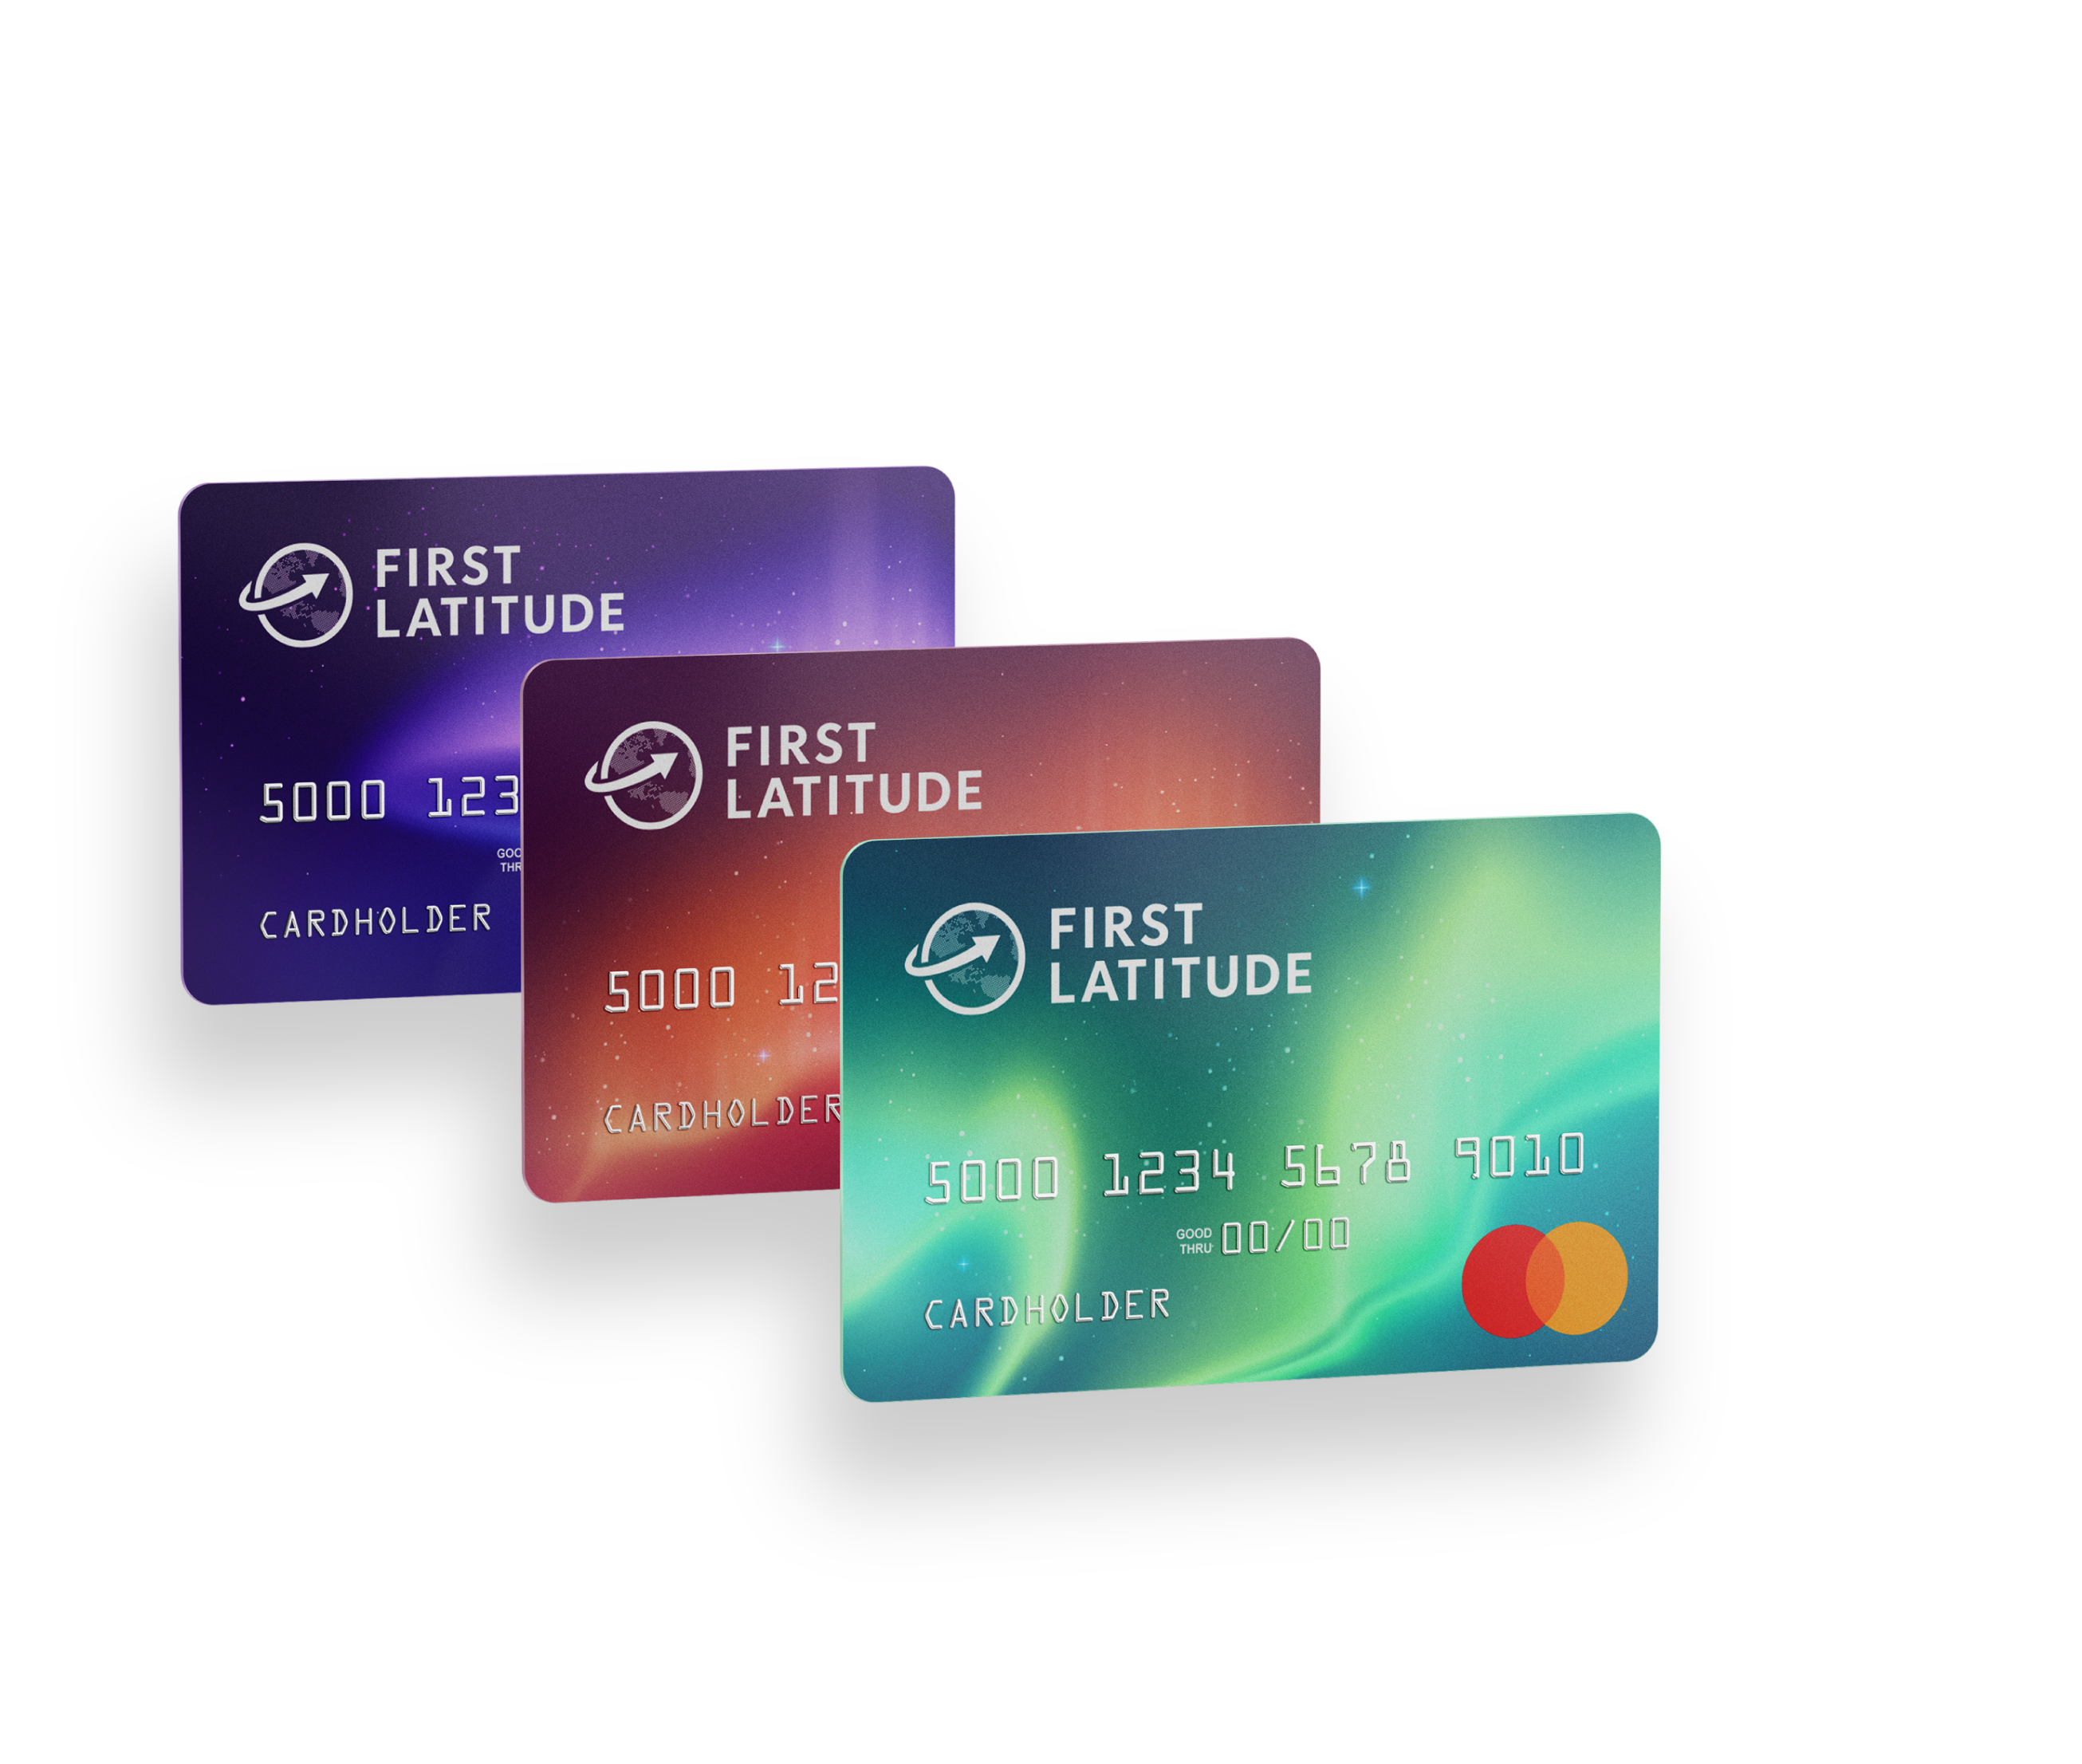 First Latitude Credit Cards Image